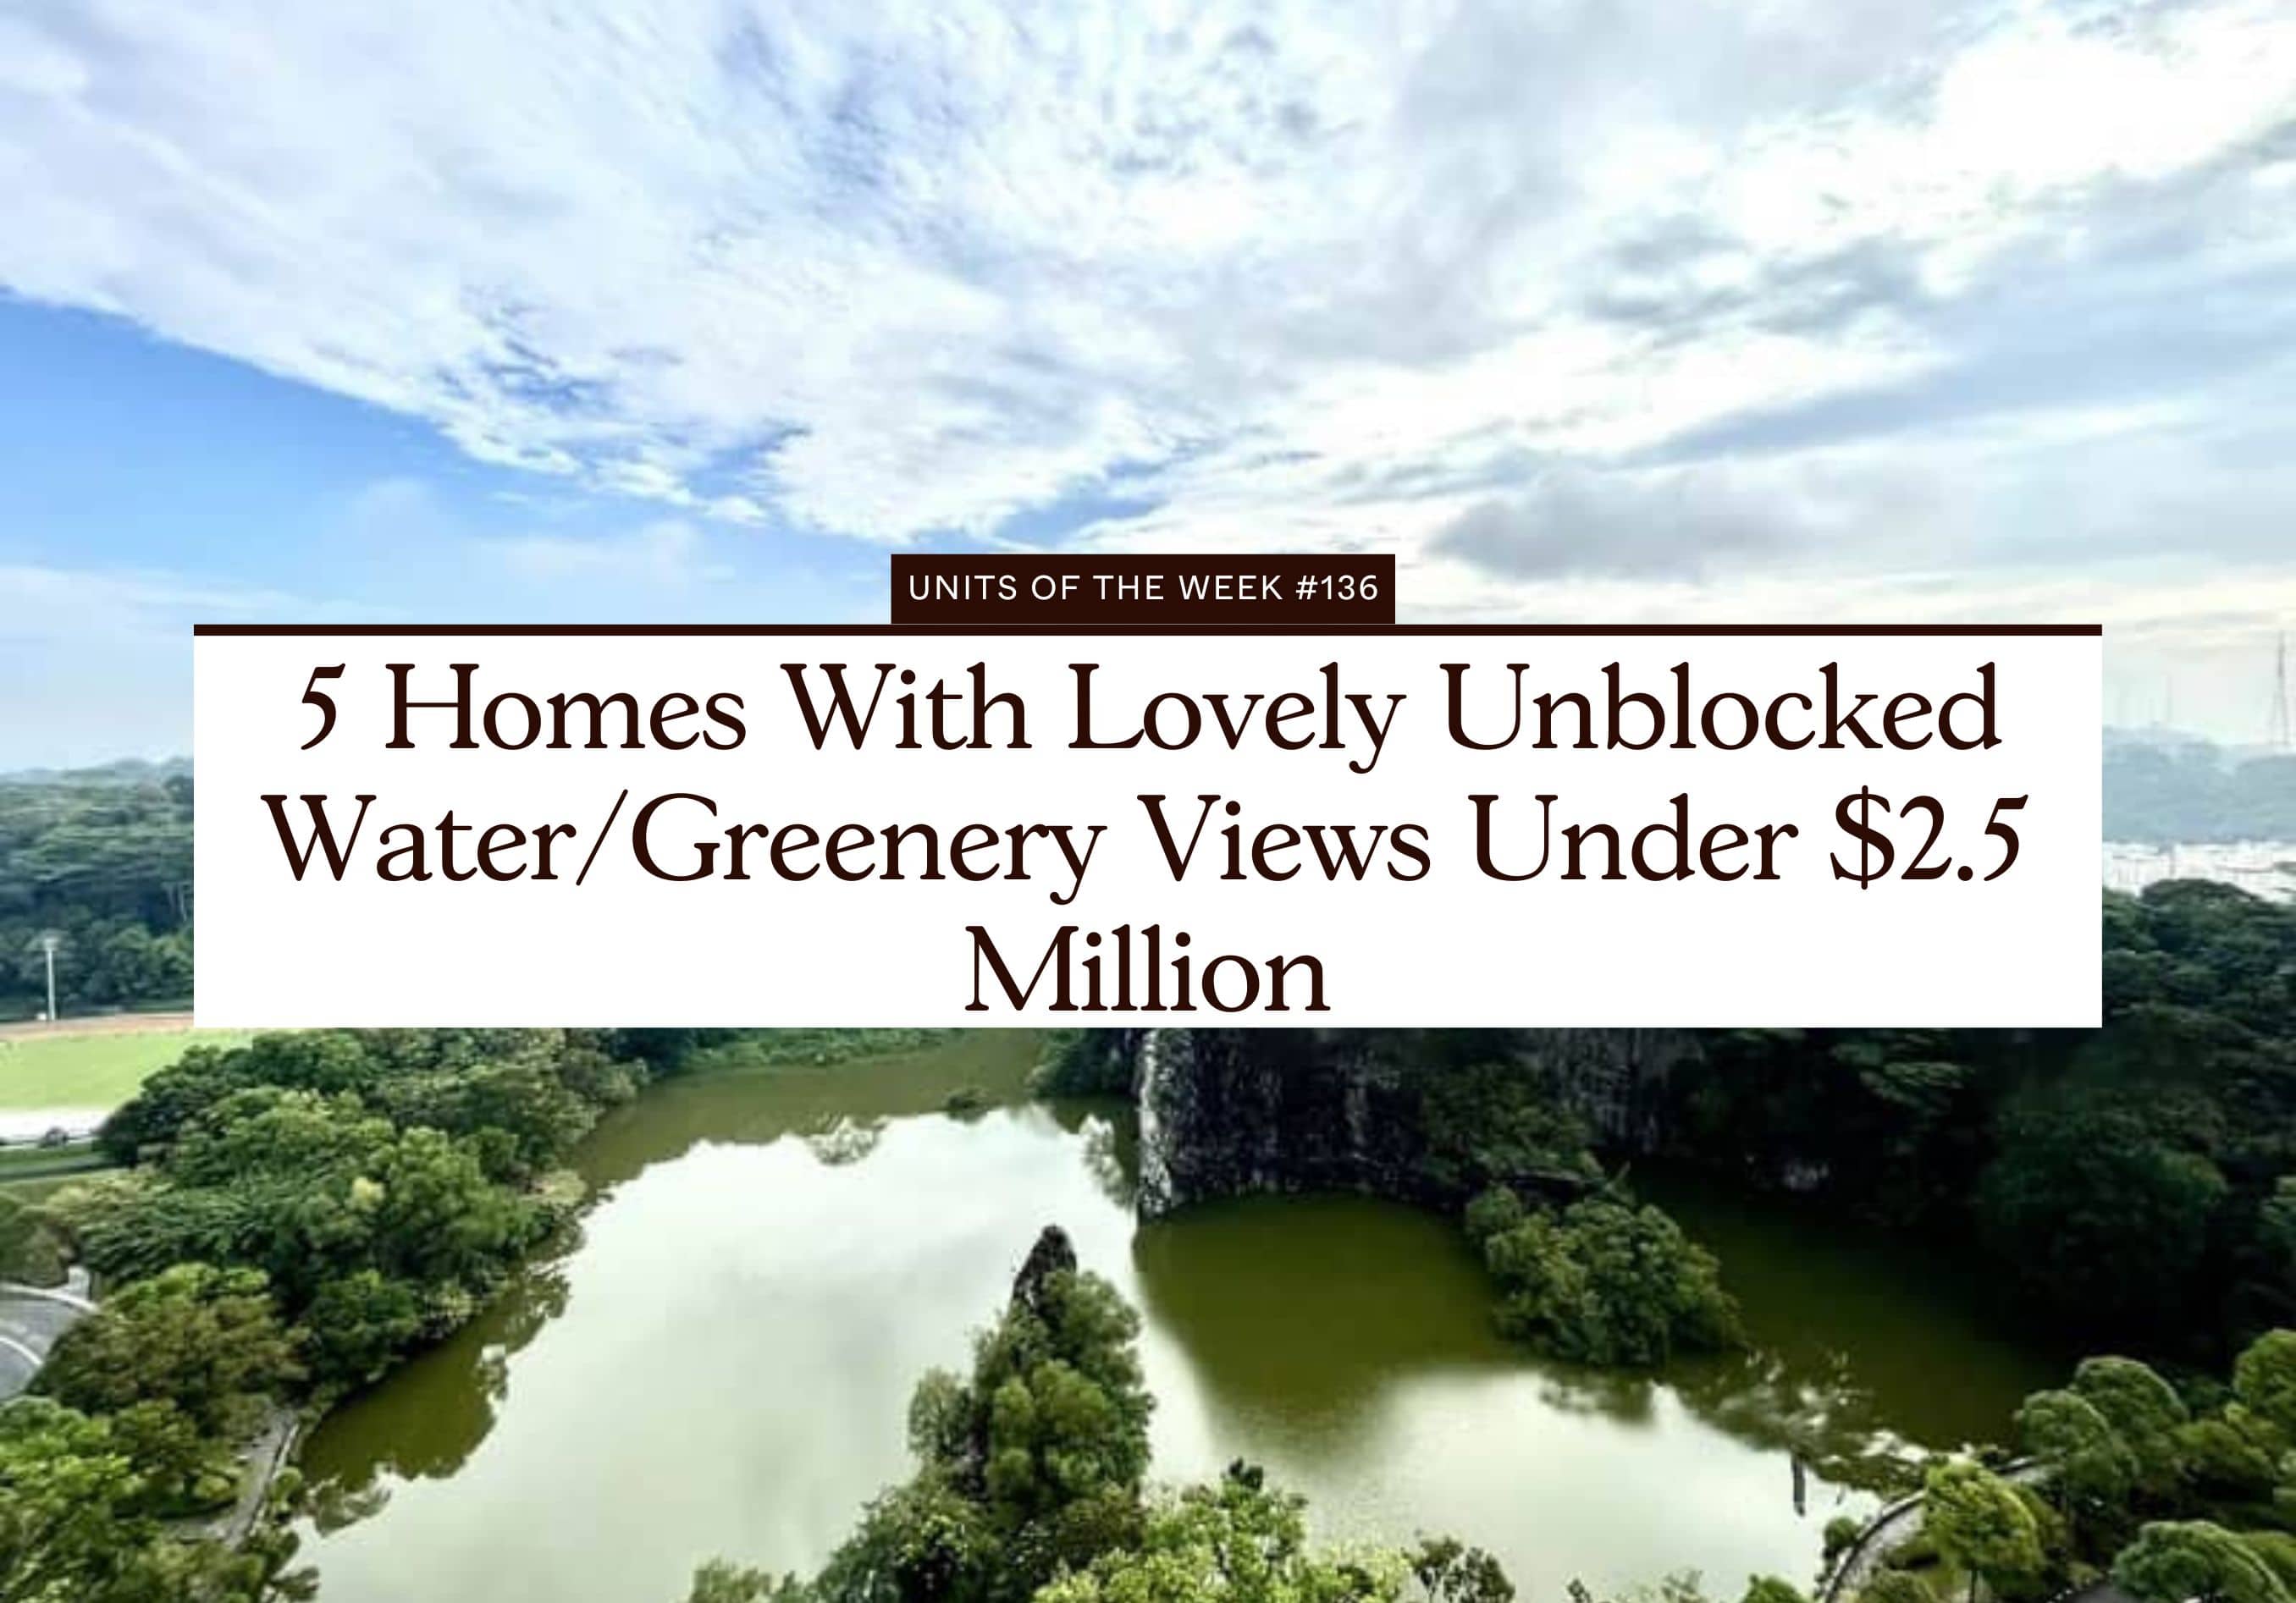 5 Homes With Lovely Unblocked WaterGreenery Views Under 2.5 Million